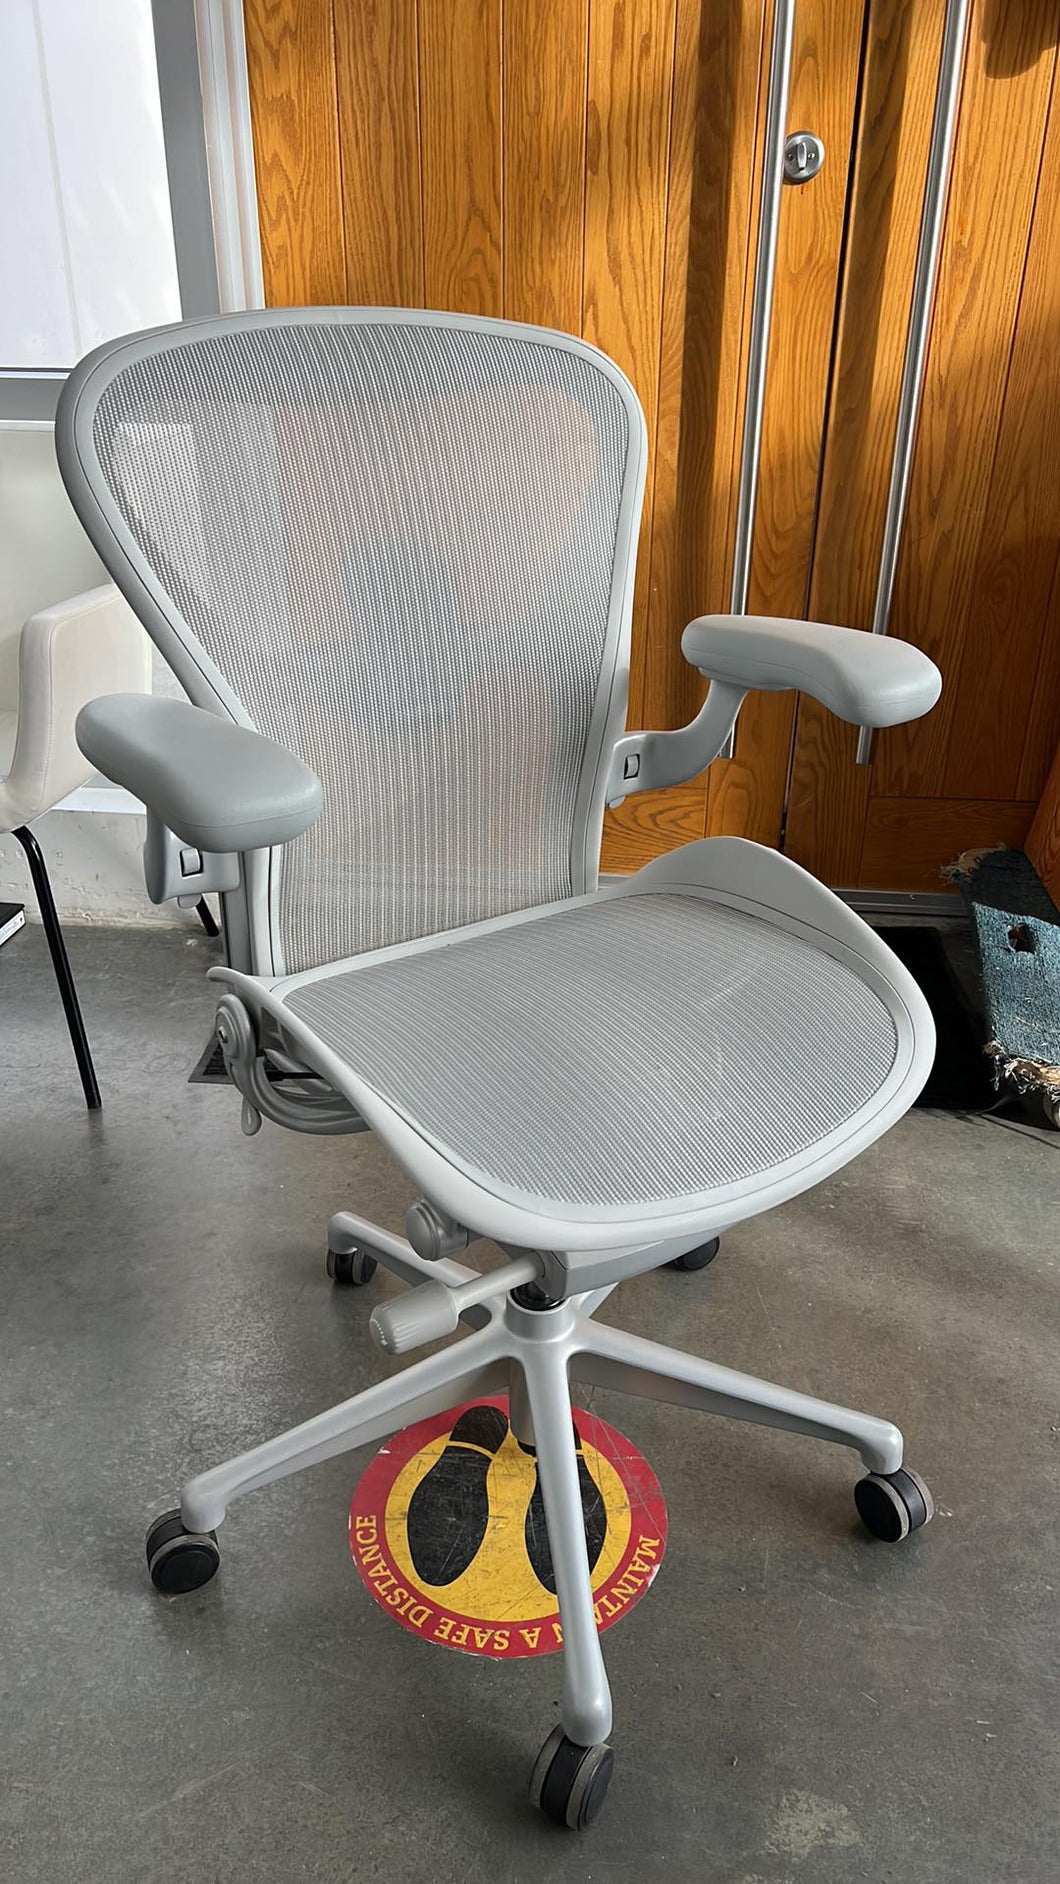 LIKE NEW White Herman Miller Aeron Chairs, Fully Loaded. Remastered!